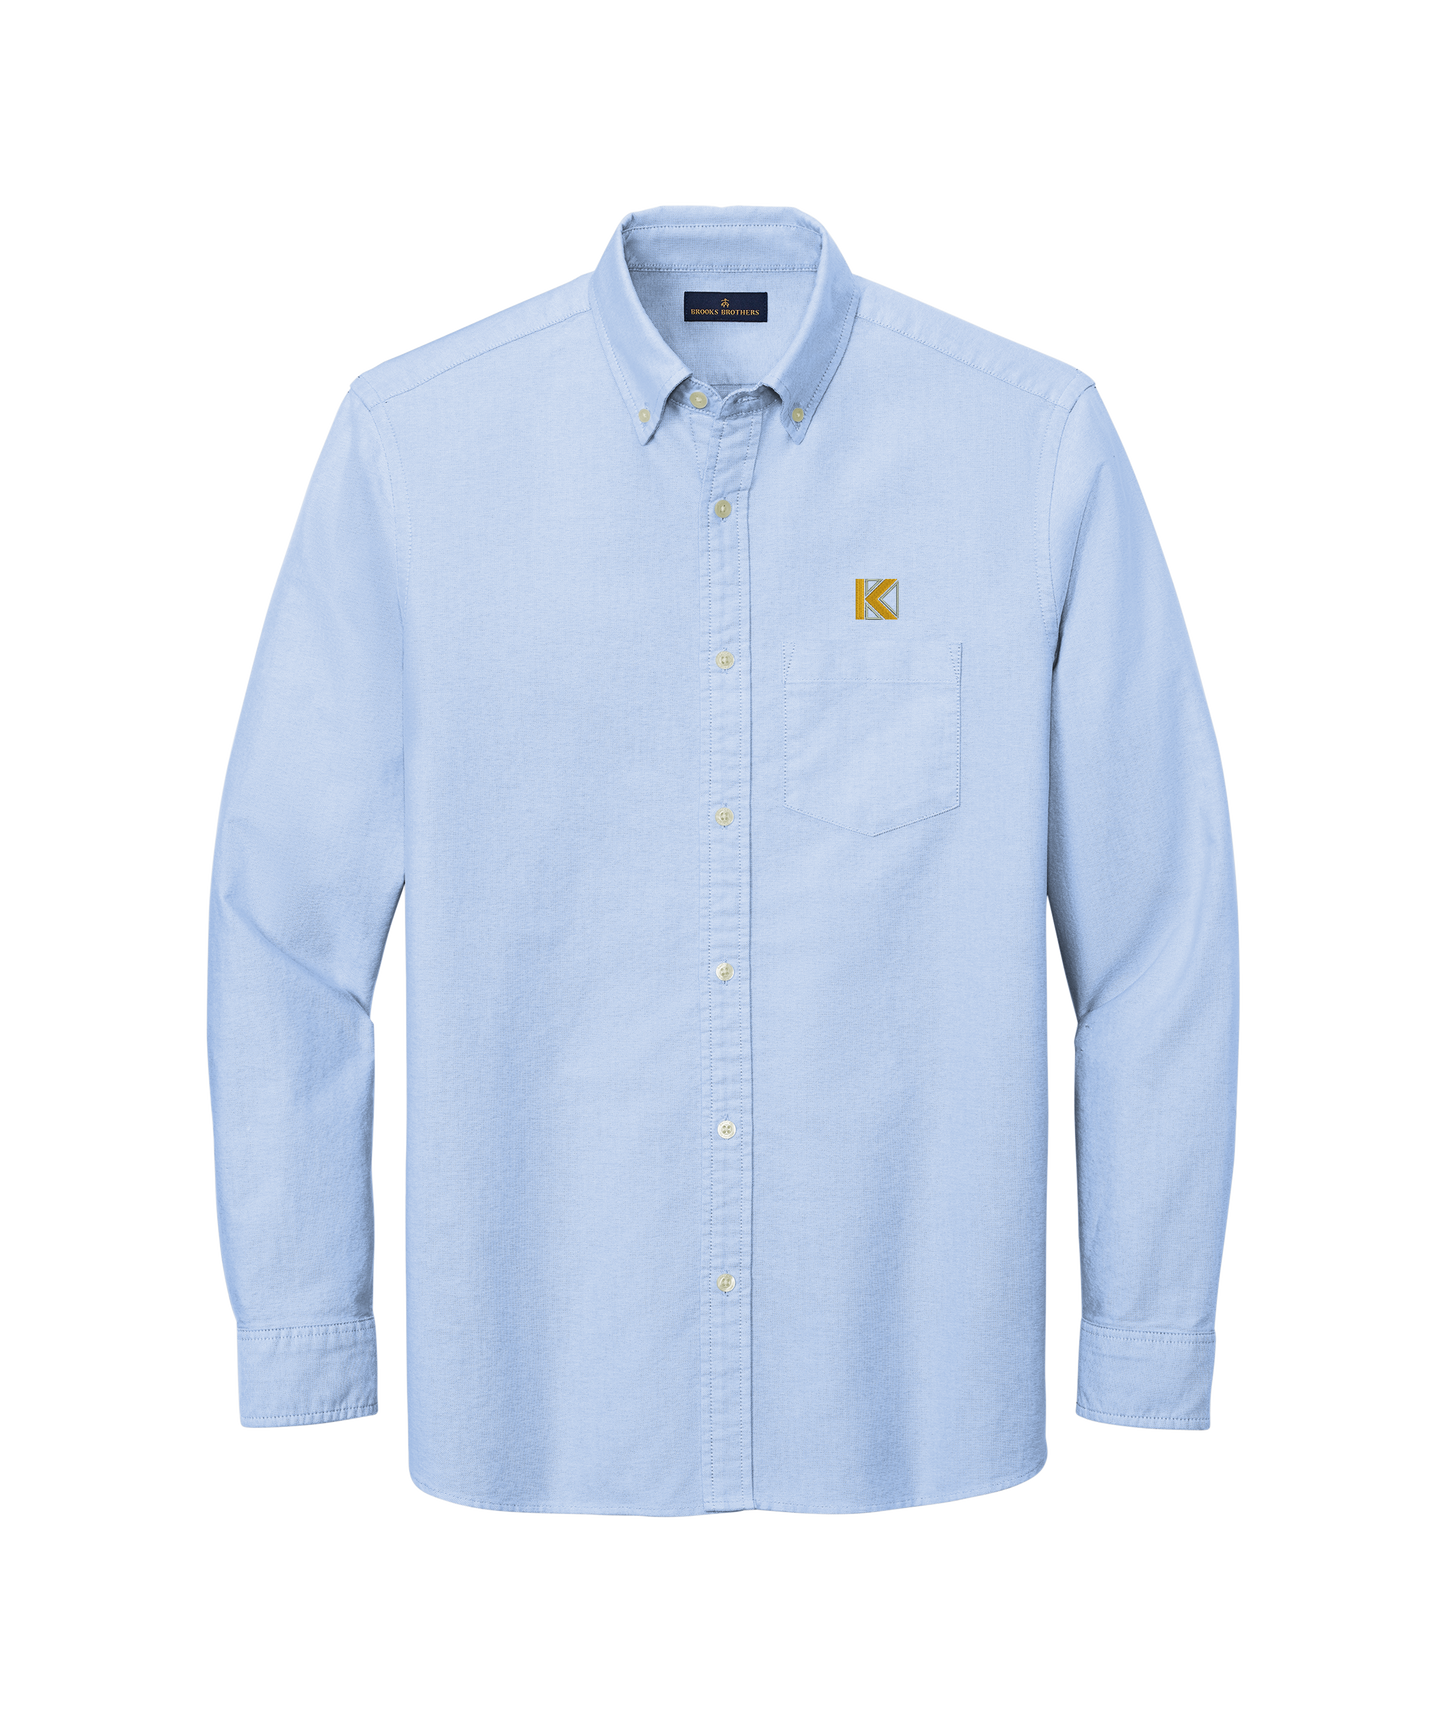 Brooks Brothers Casual Oxford Cloth Shirt